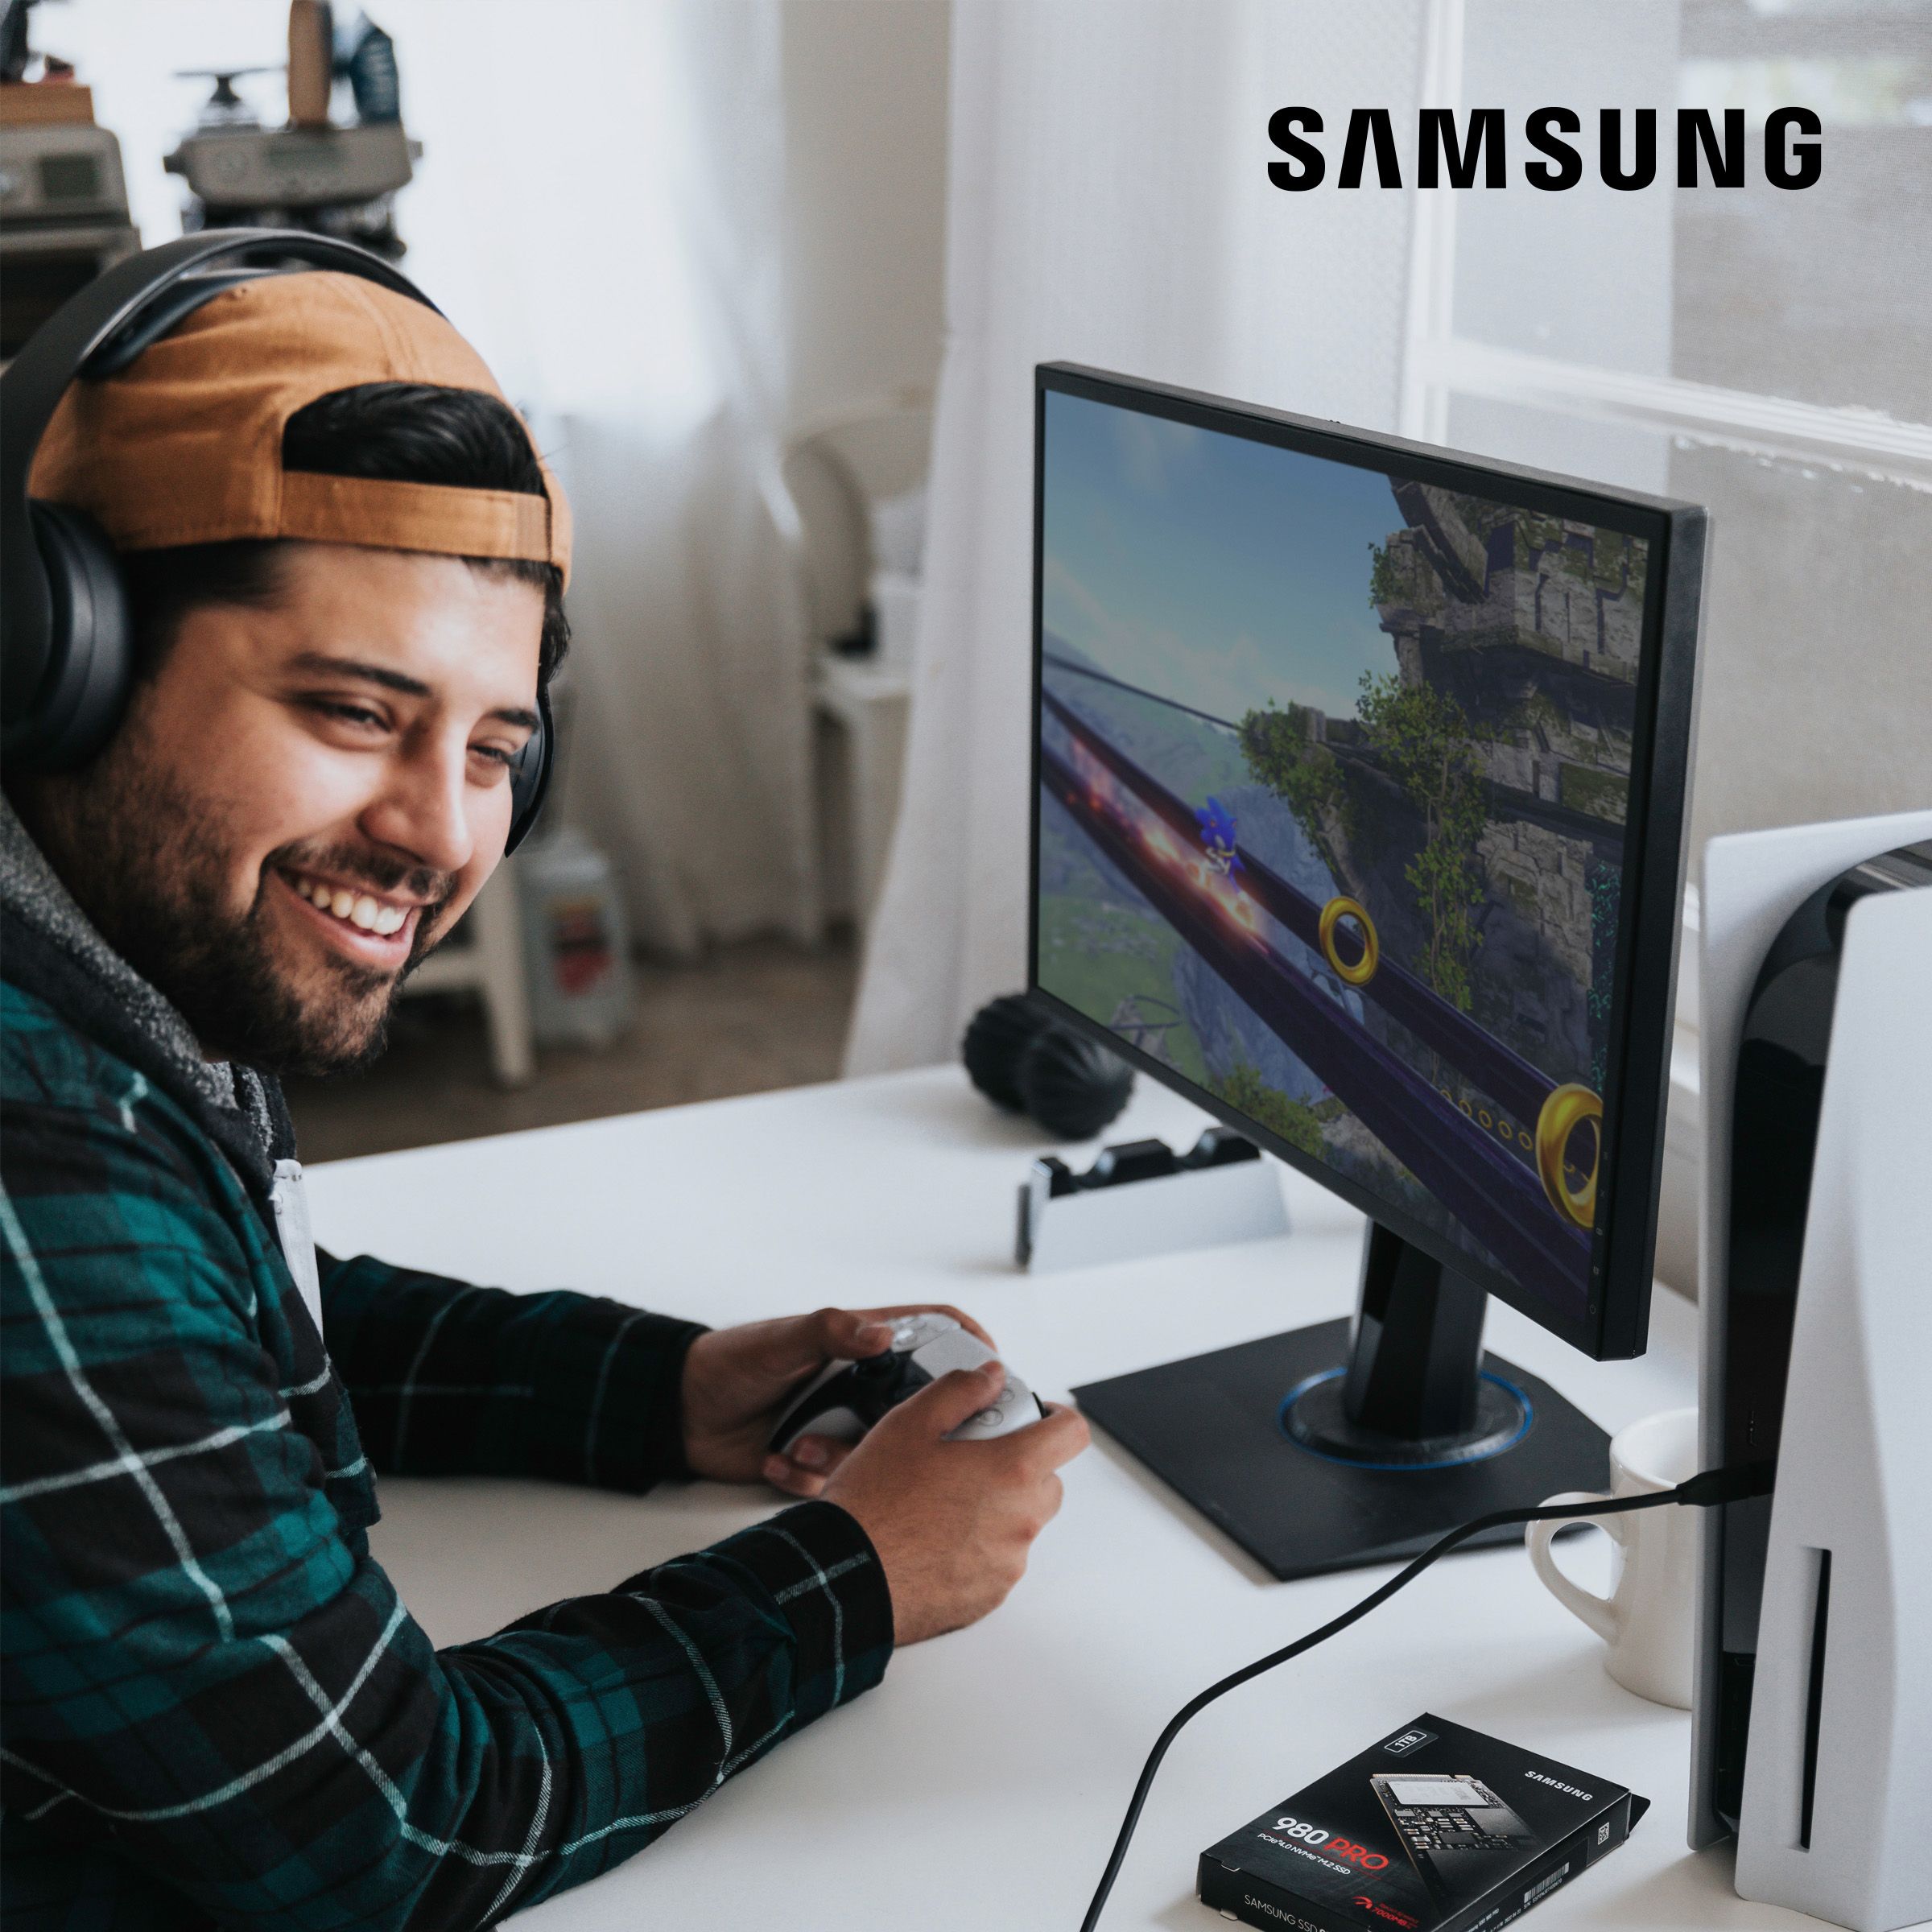 Stay at the top of your game with Samsung storage